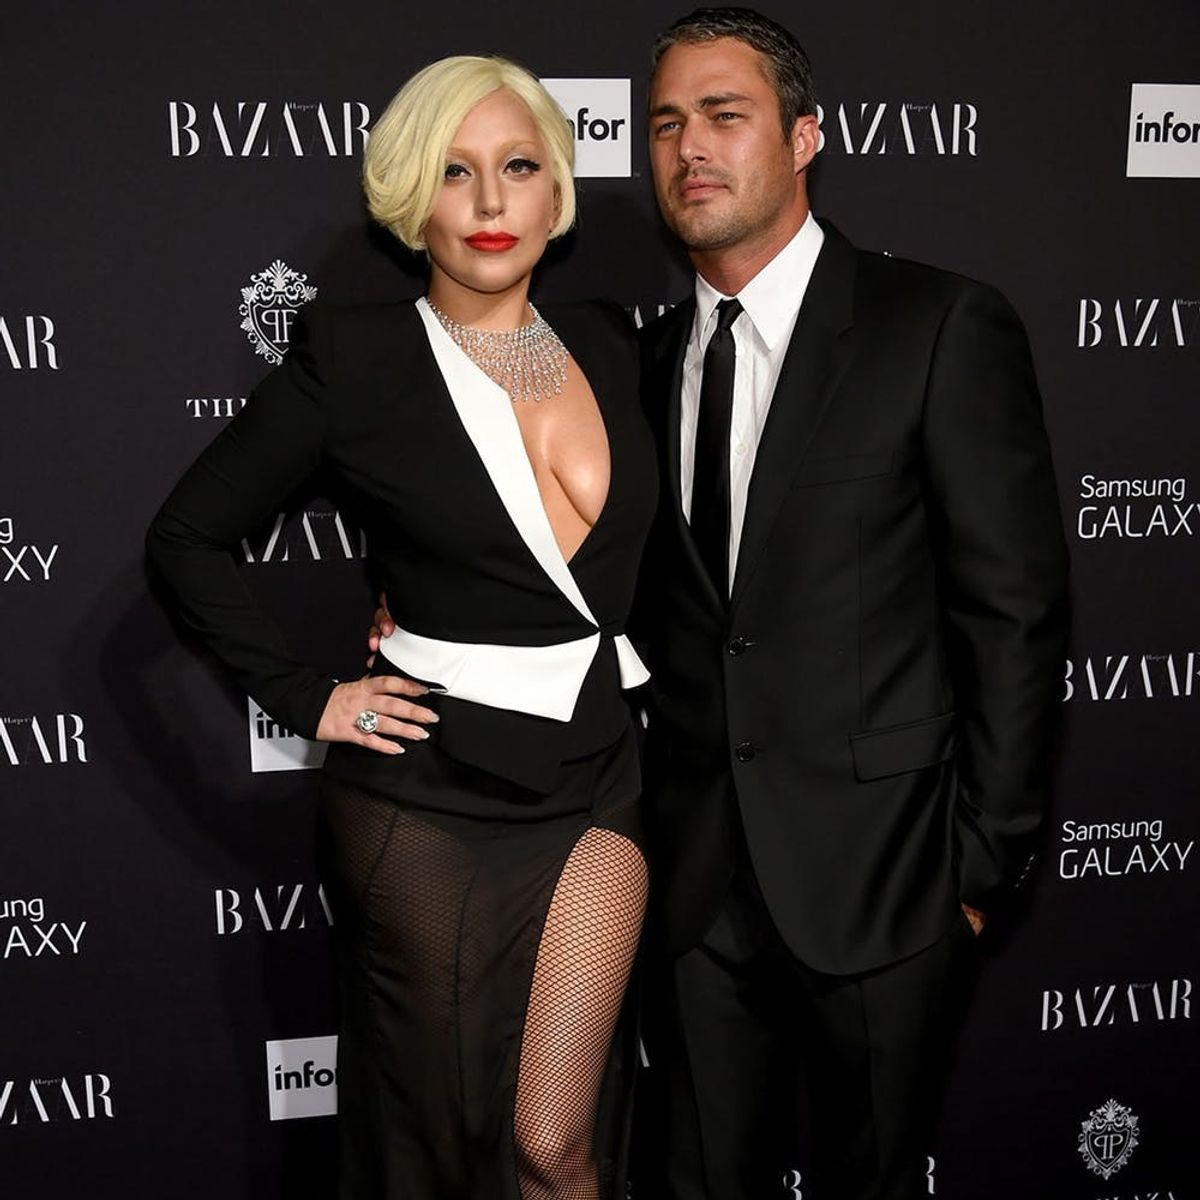 Get Ready to Fall in Love With Lady Gaga’s Engagement Ring